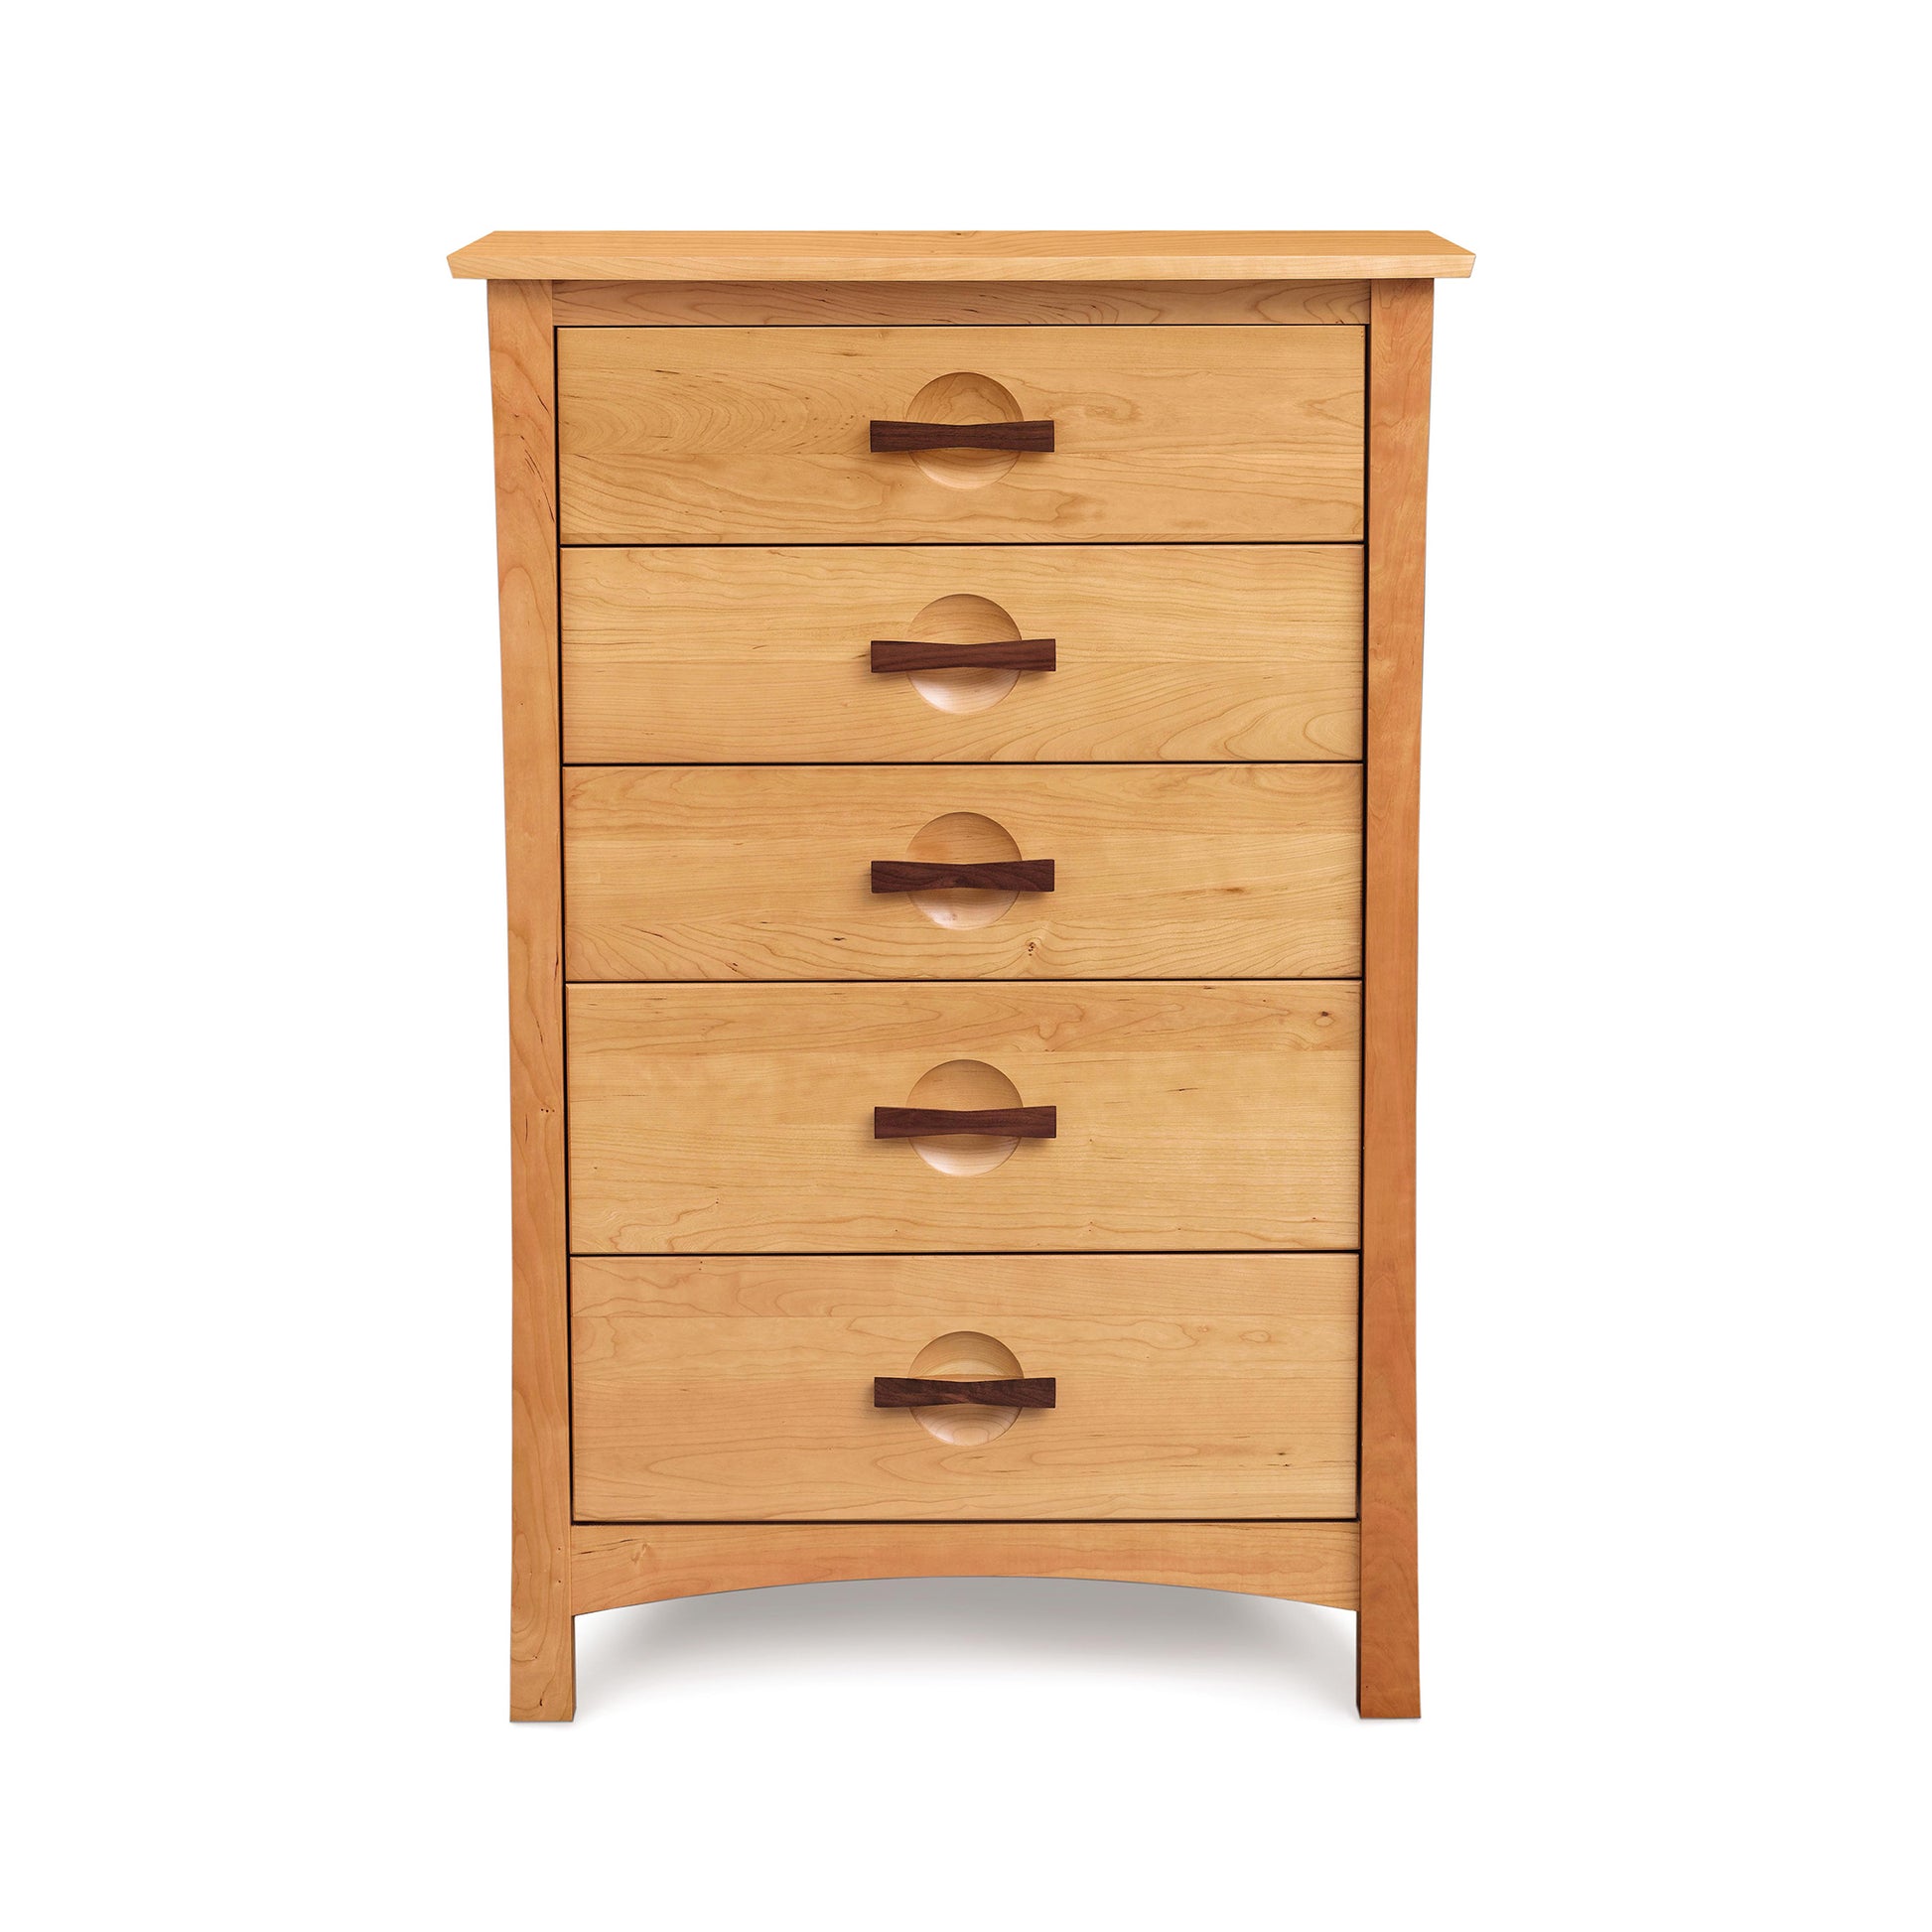 A Copeland Furniture Berkeley 5-Drawer Chest inspired by American Arts & Crafts, against a white background.